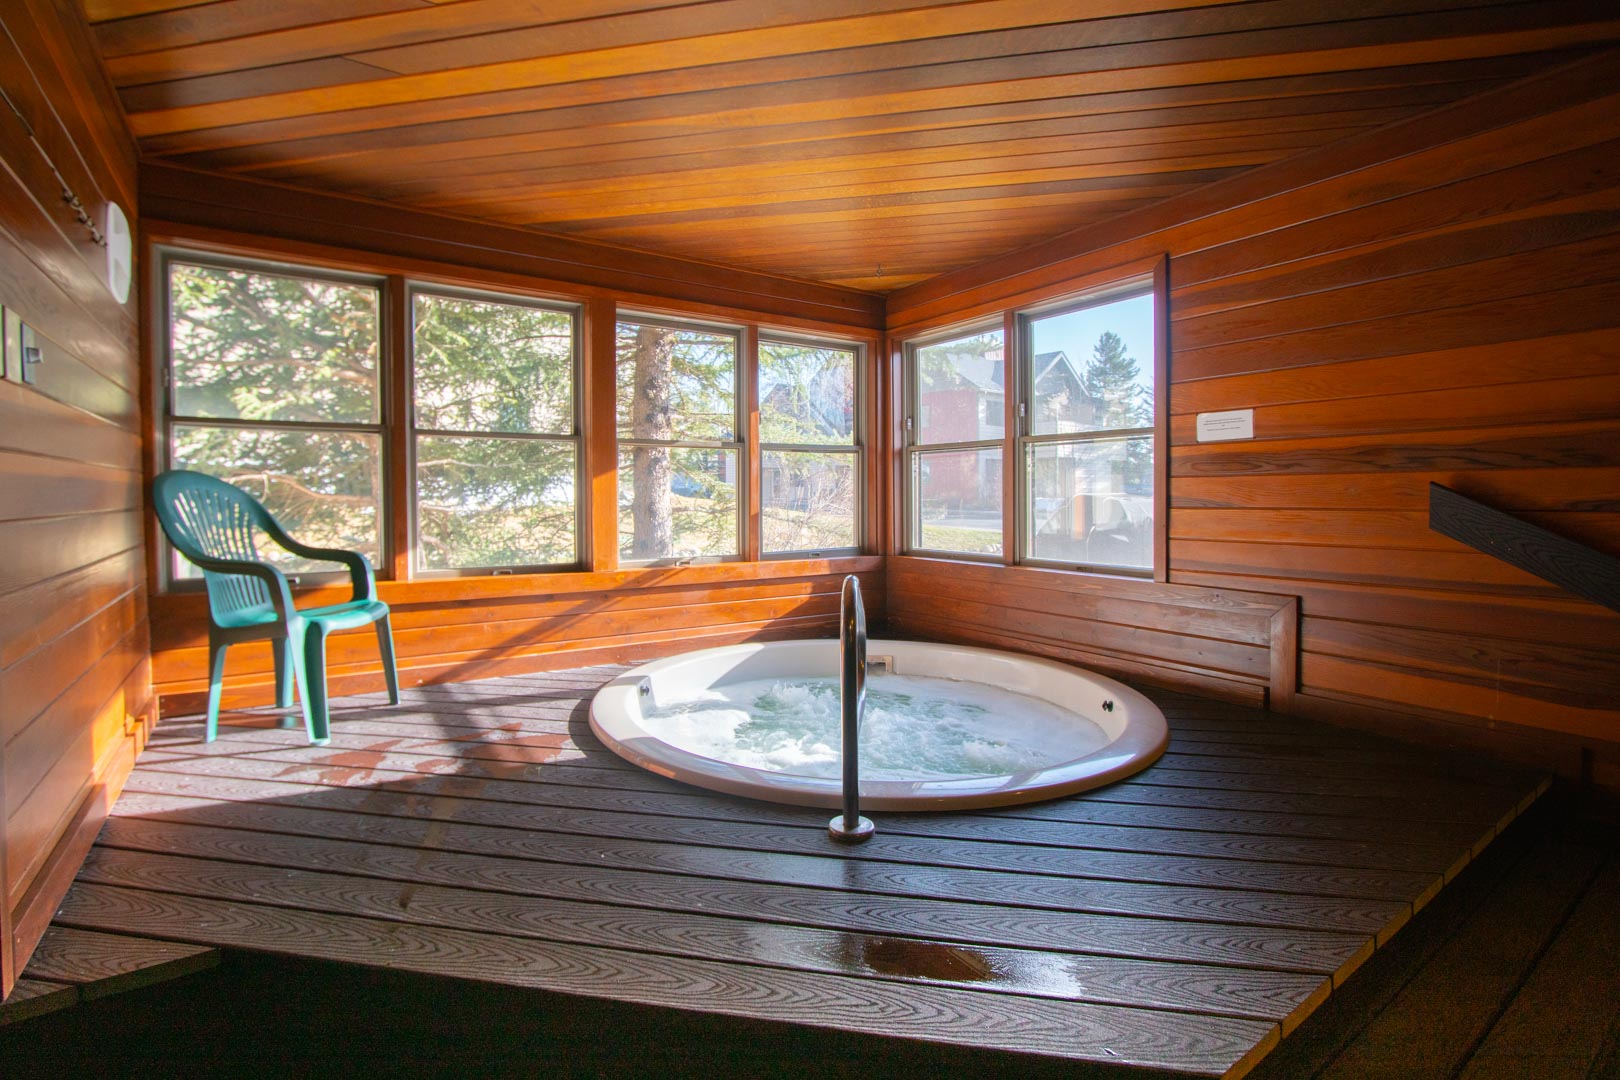 An indoor jacuzzi tub at VRI's Sunburst Resort in Steamboat Springs, CO.